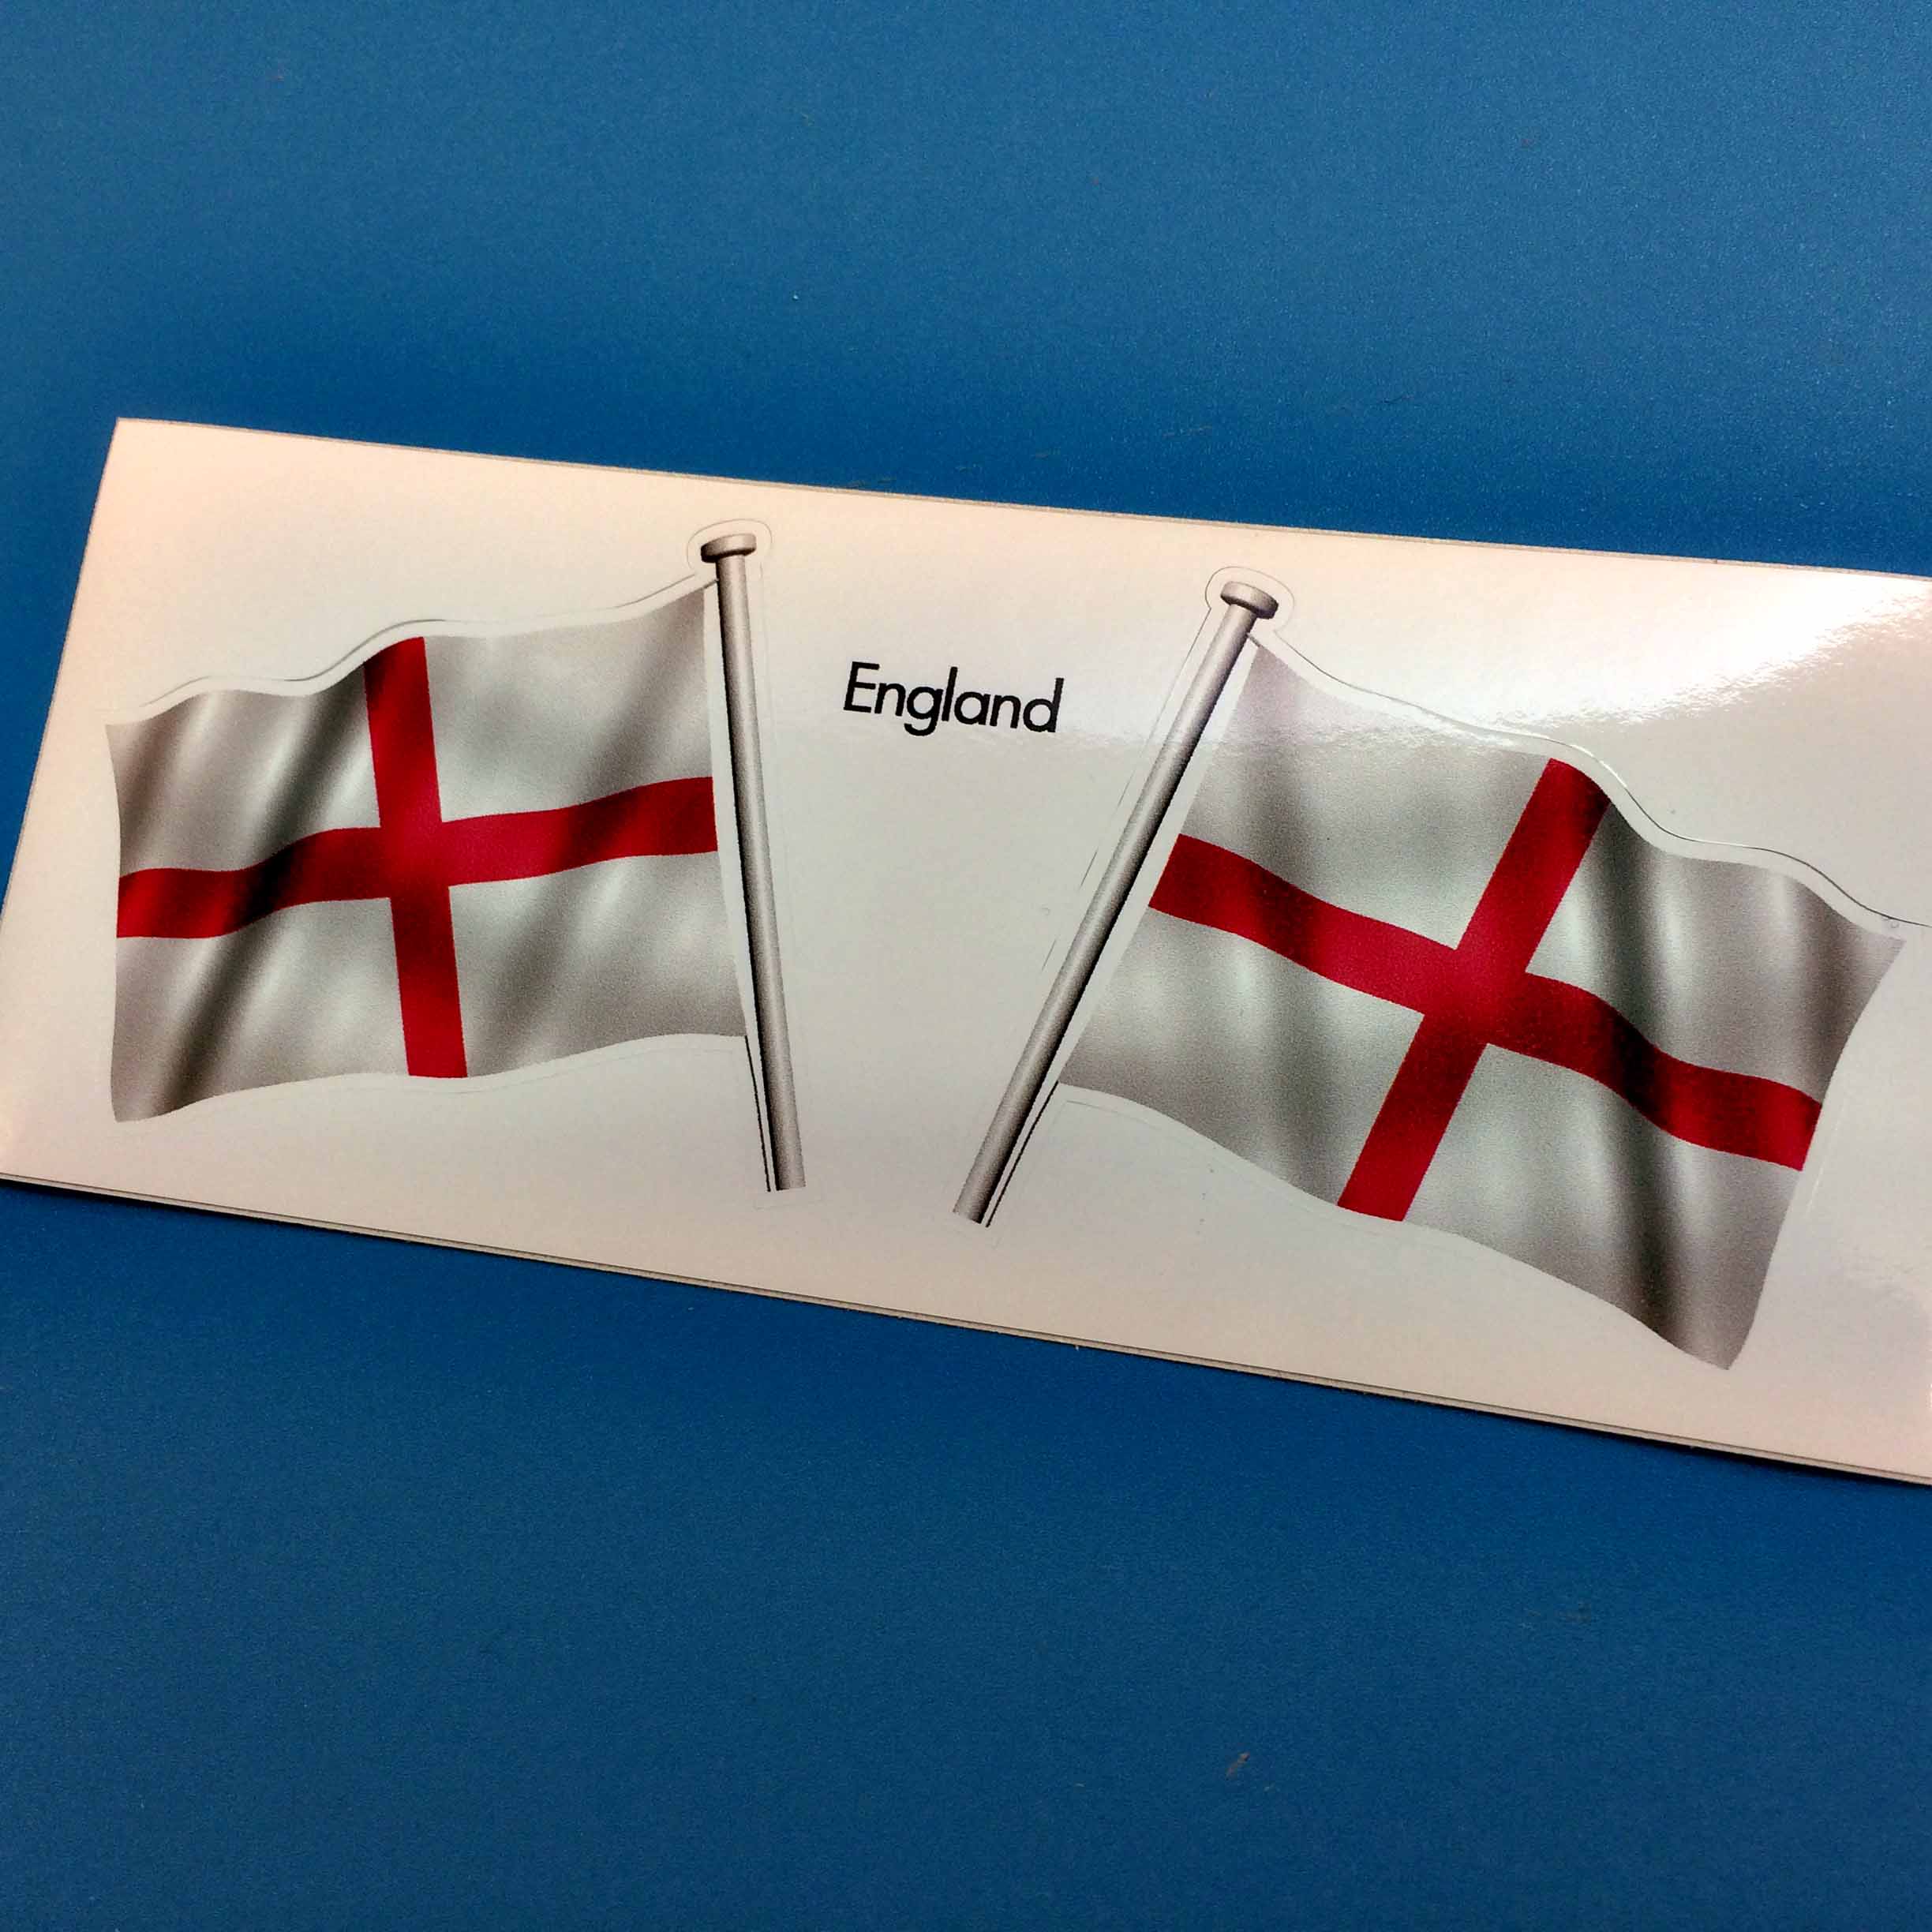 A wavy flag of England on a pole. A red cross on a white field.